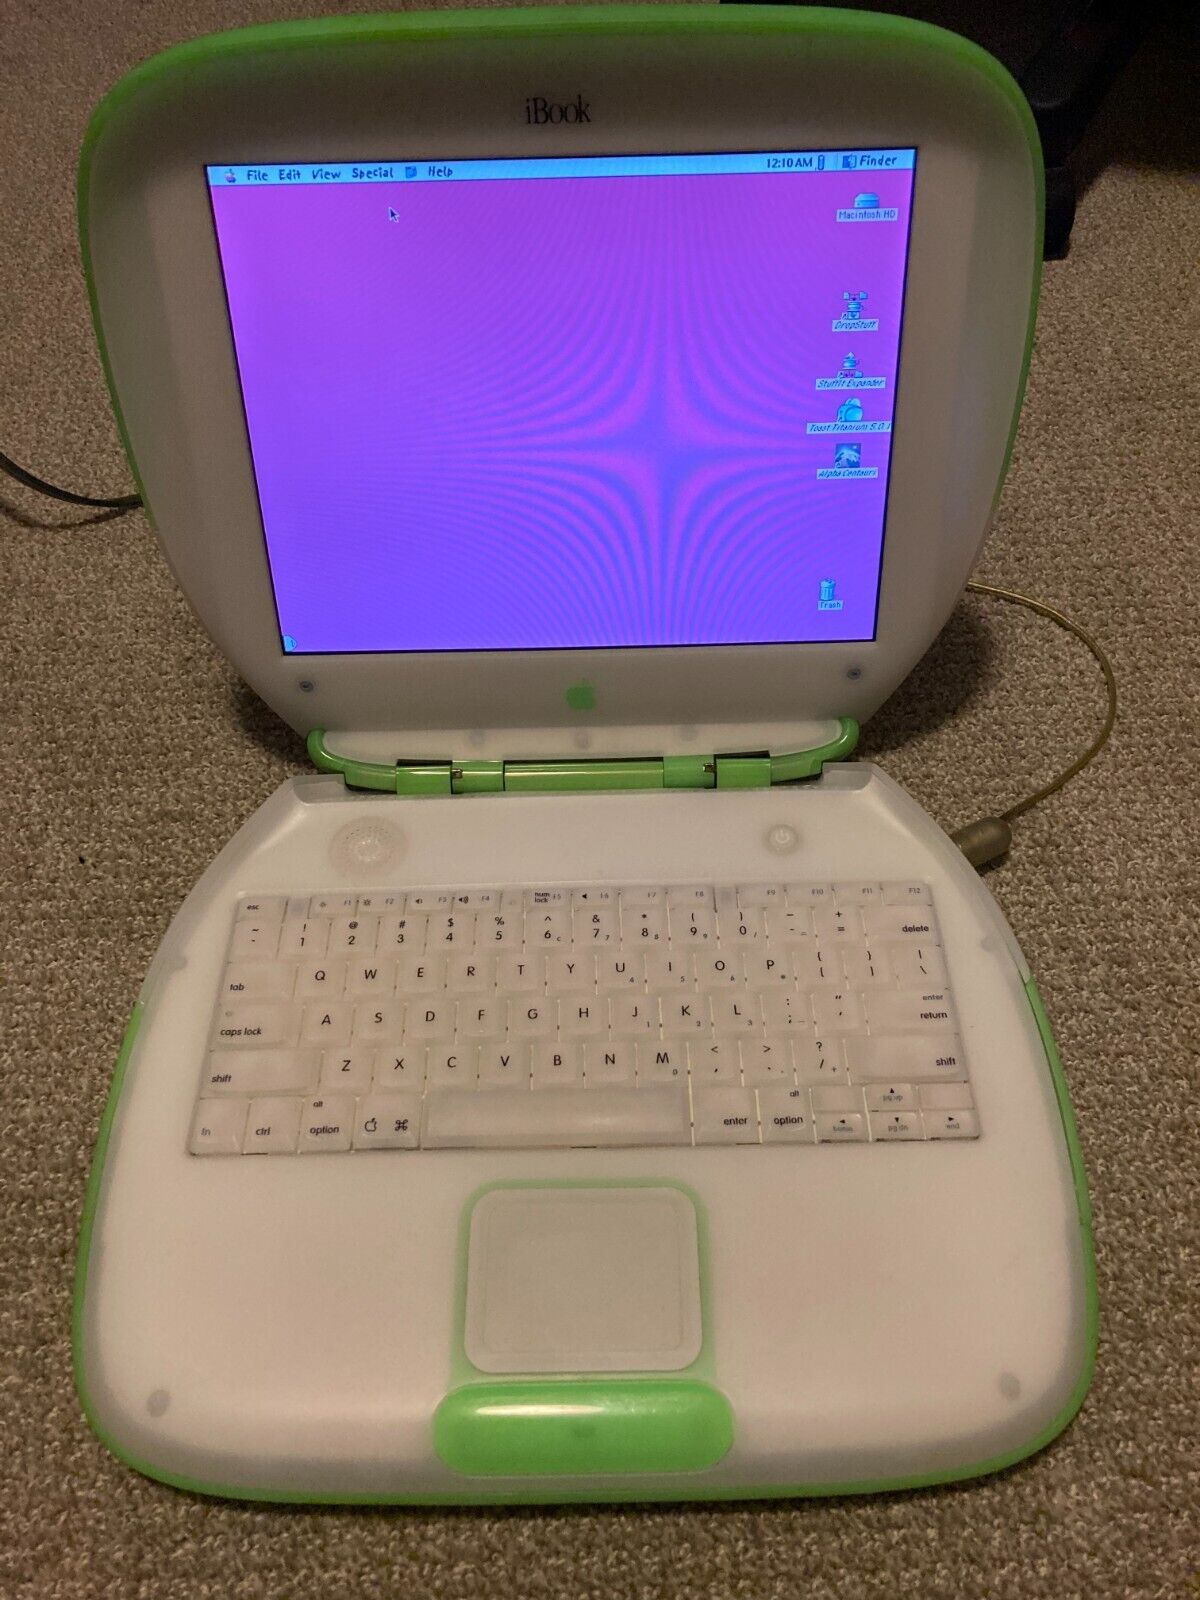 Vintage Apple iBook G3 366Mhz Clamshell Key Lime Green M6411 Firewire 64mb RAM